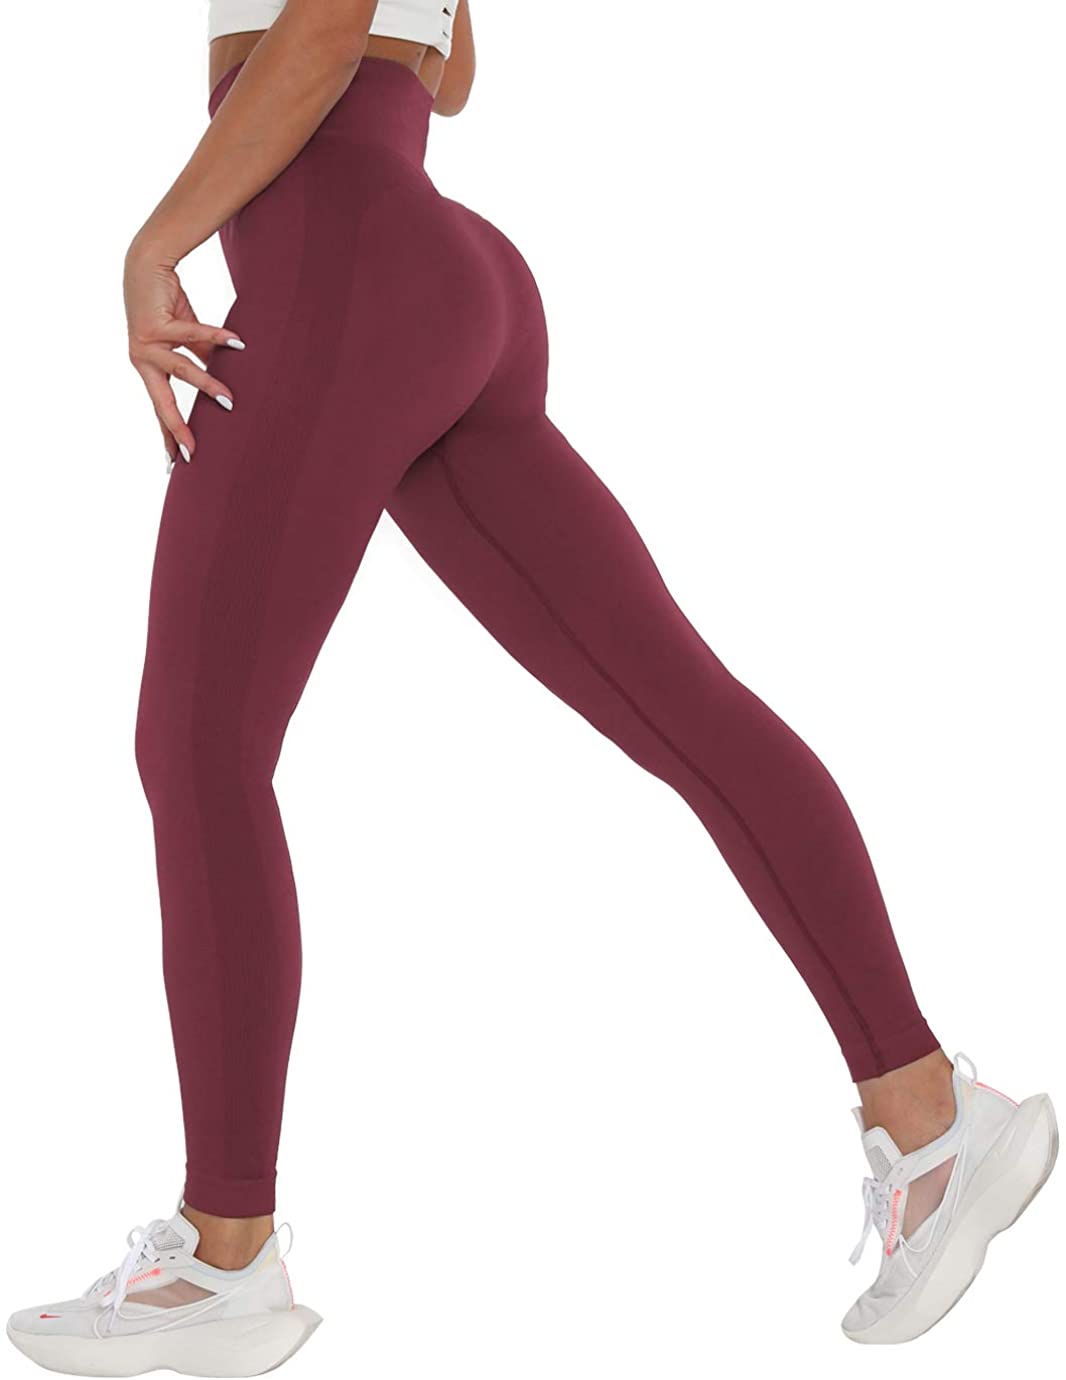 MANIFIQUE Womens Seamless Leggings High Waisted Workout Tight